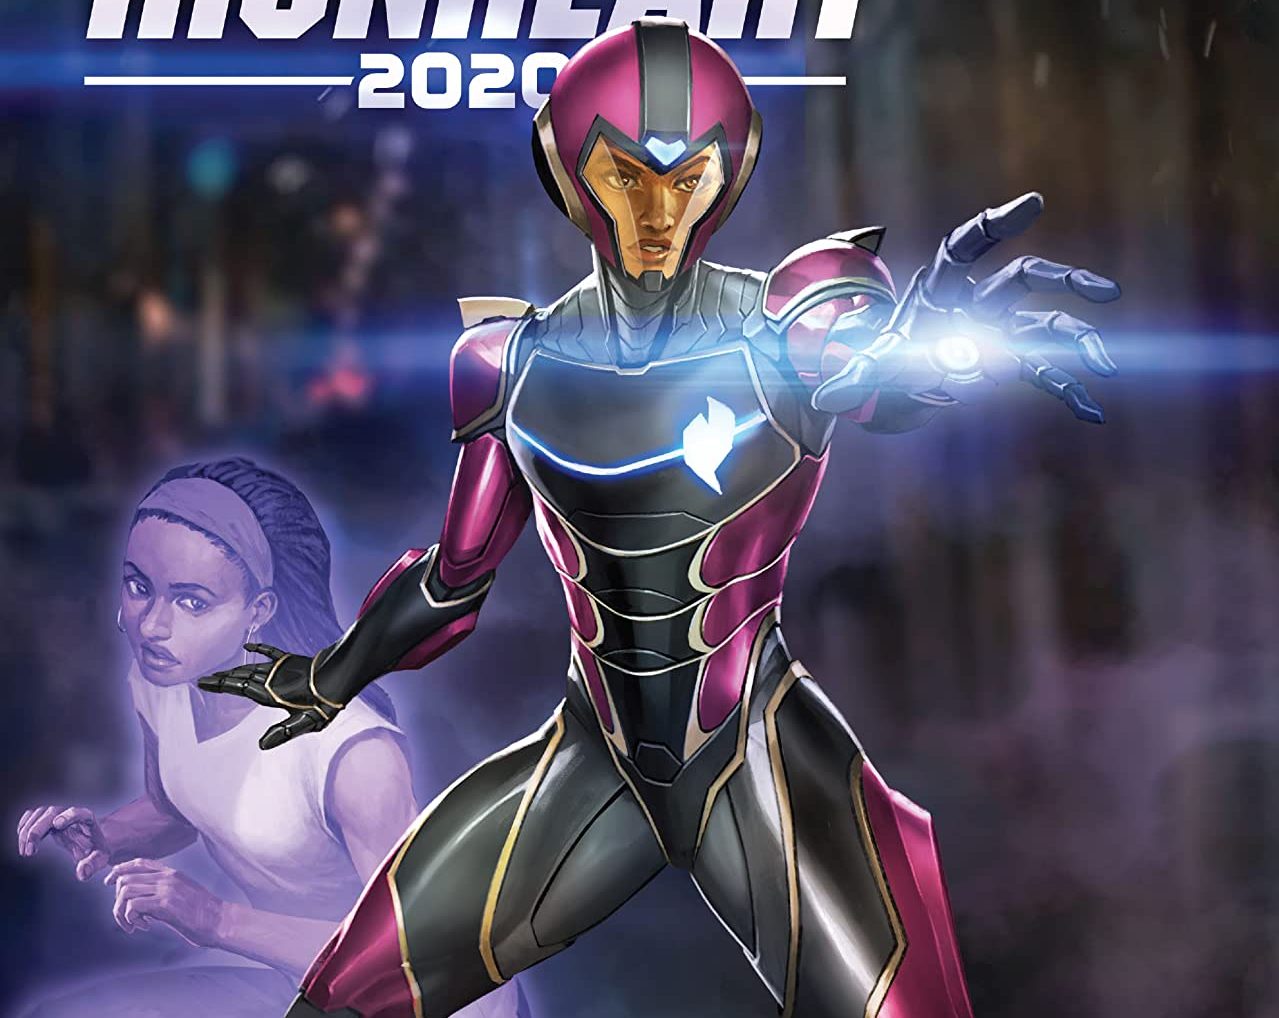 Ironheart 2020 #1 Review